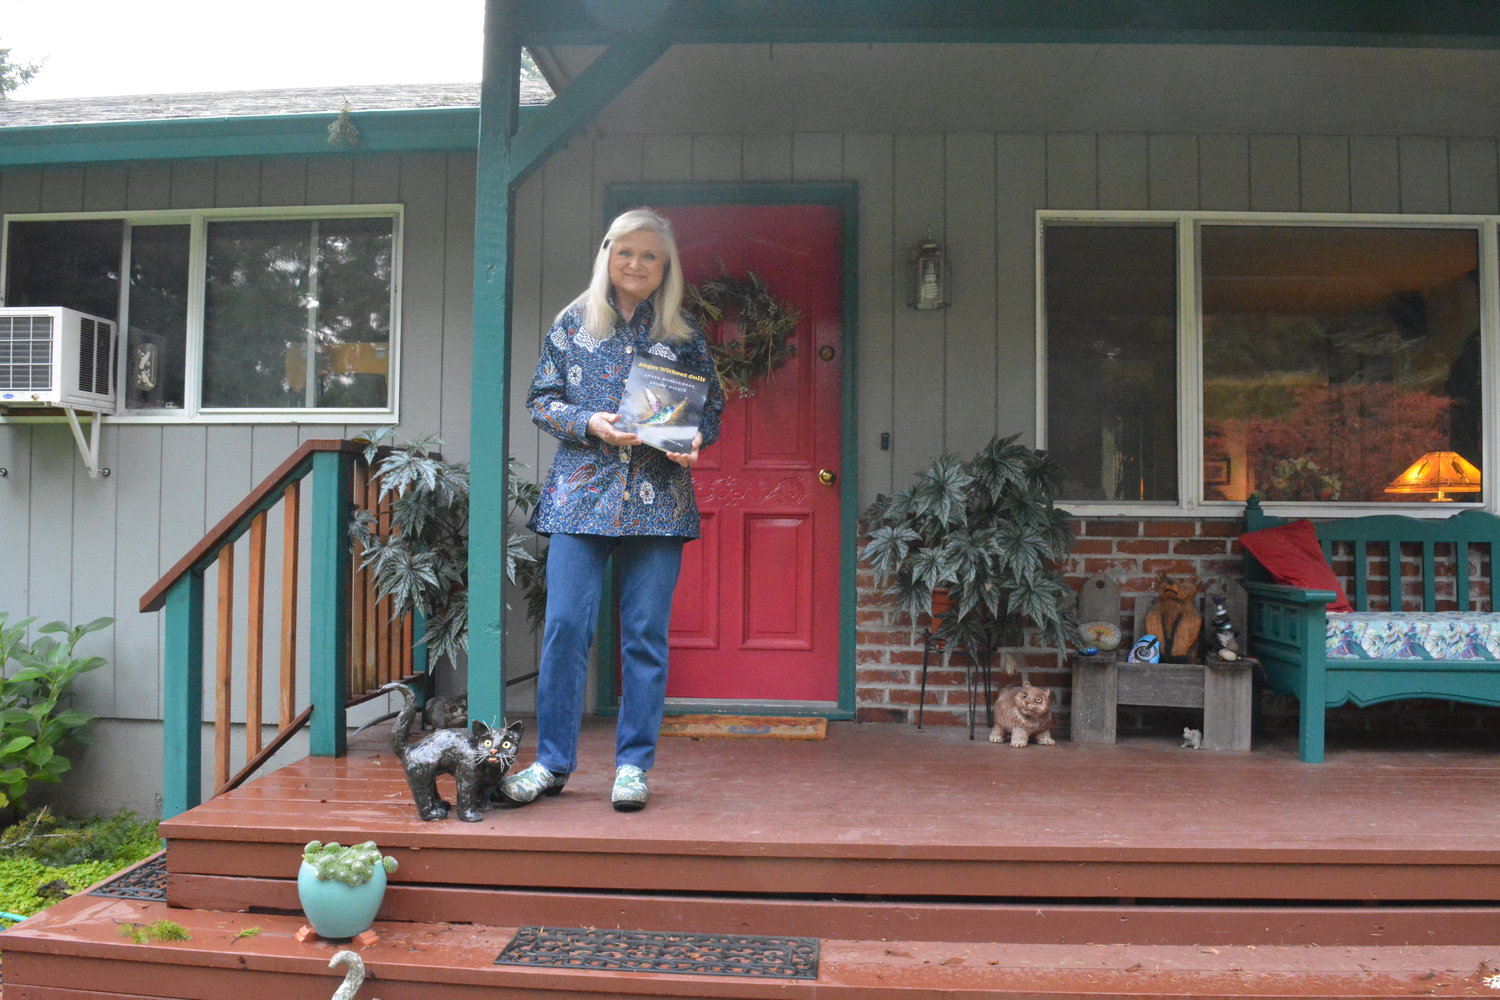 Dr. Gerry Dunne poses with her book Anger Without Guilt in front of her home in Battle Ground.